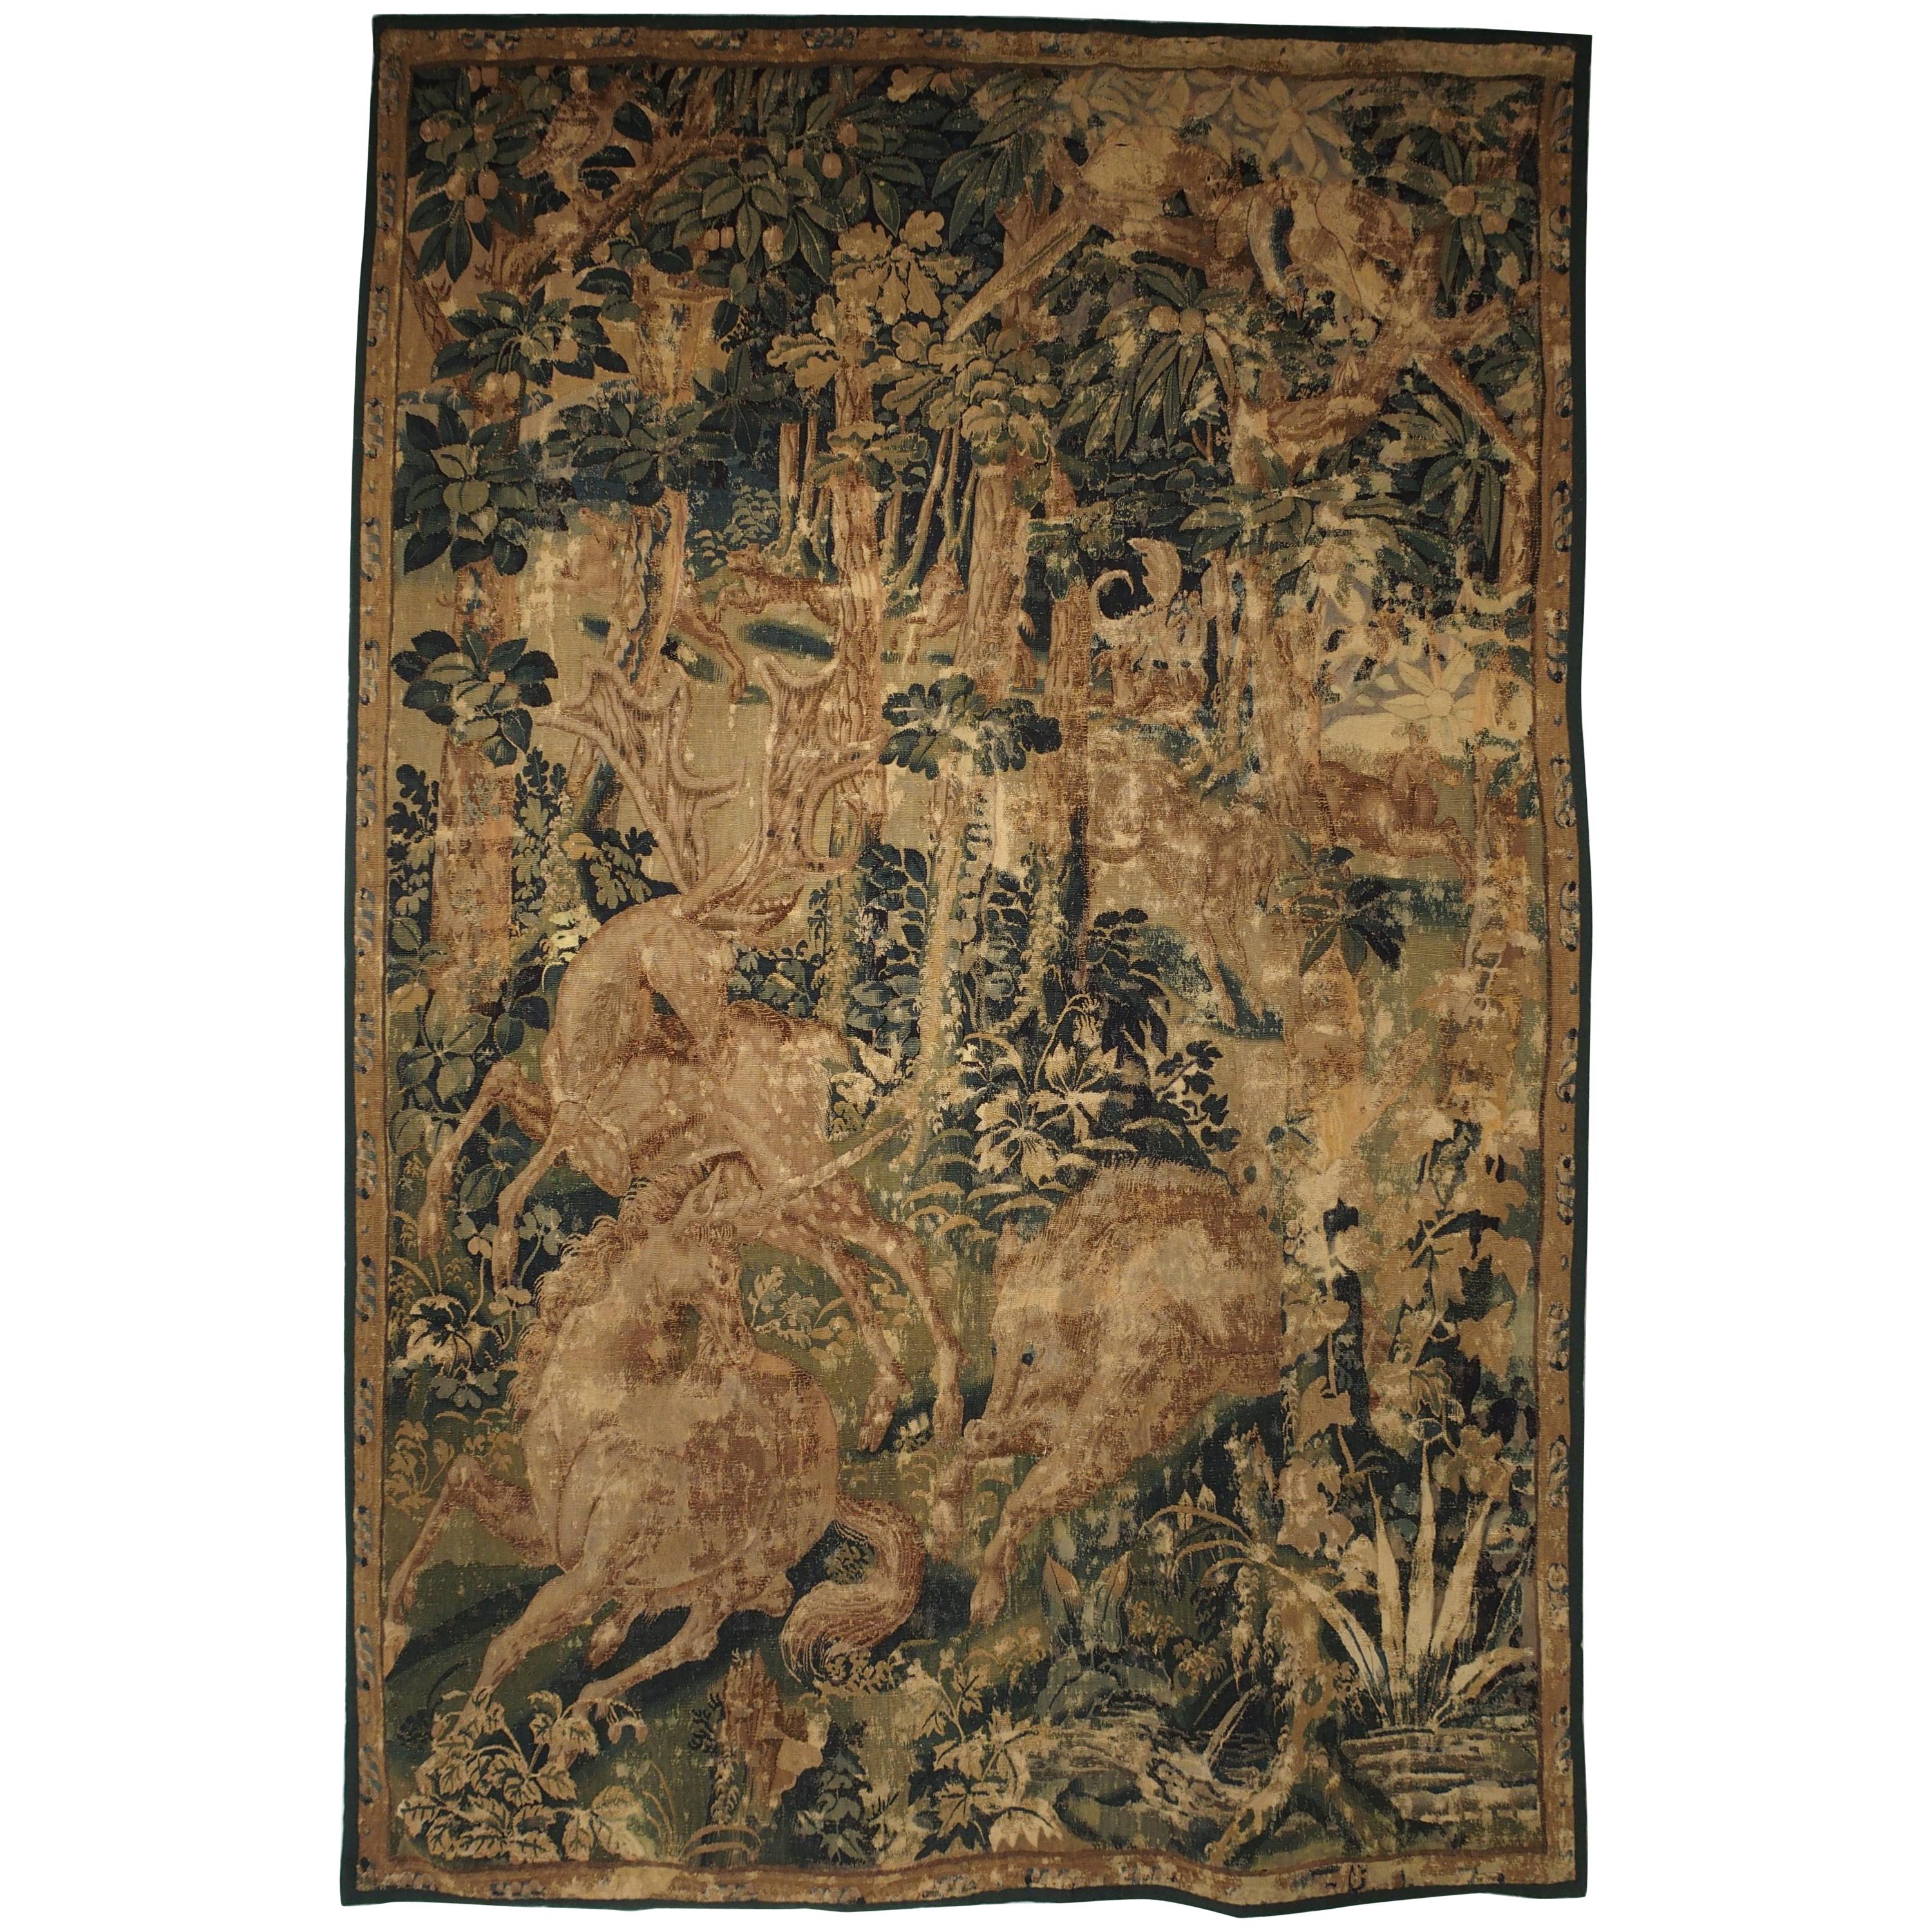 Late 16th Century Flemish Game Park Tapestry with Unicorn, Stag, and Boar